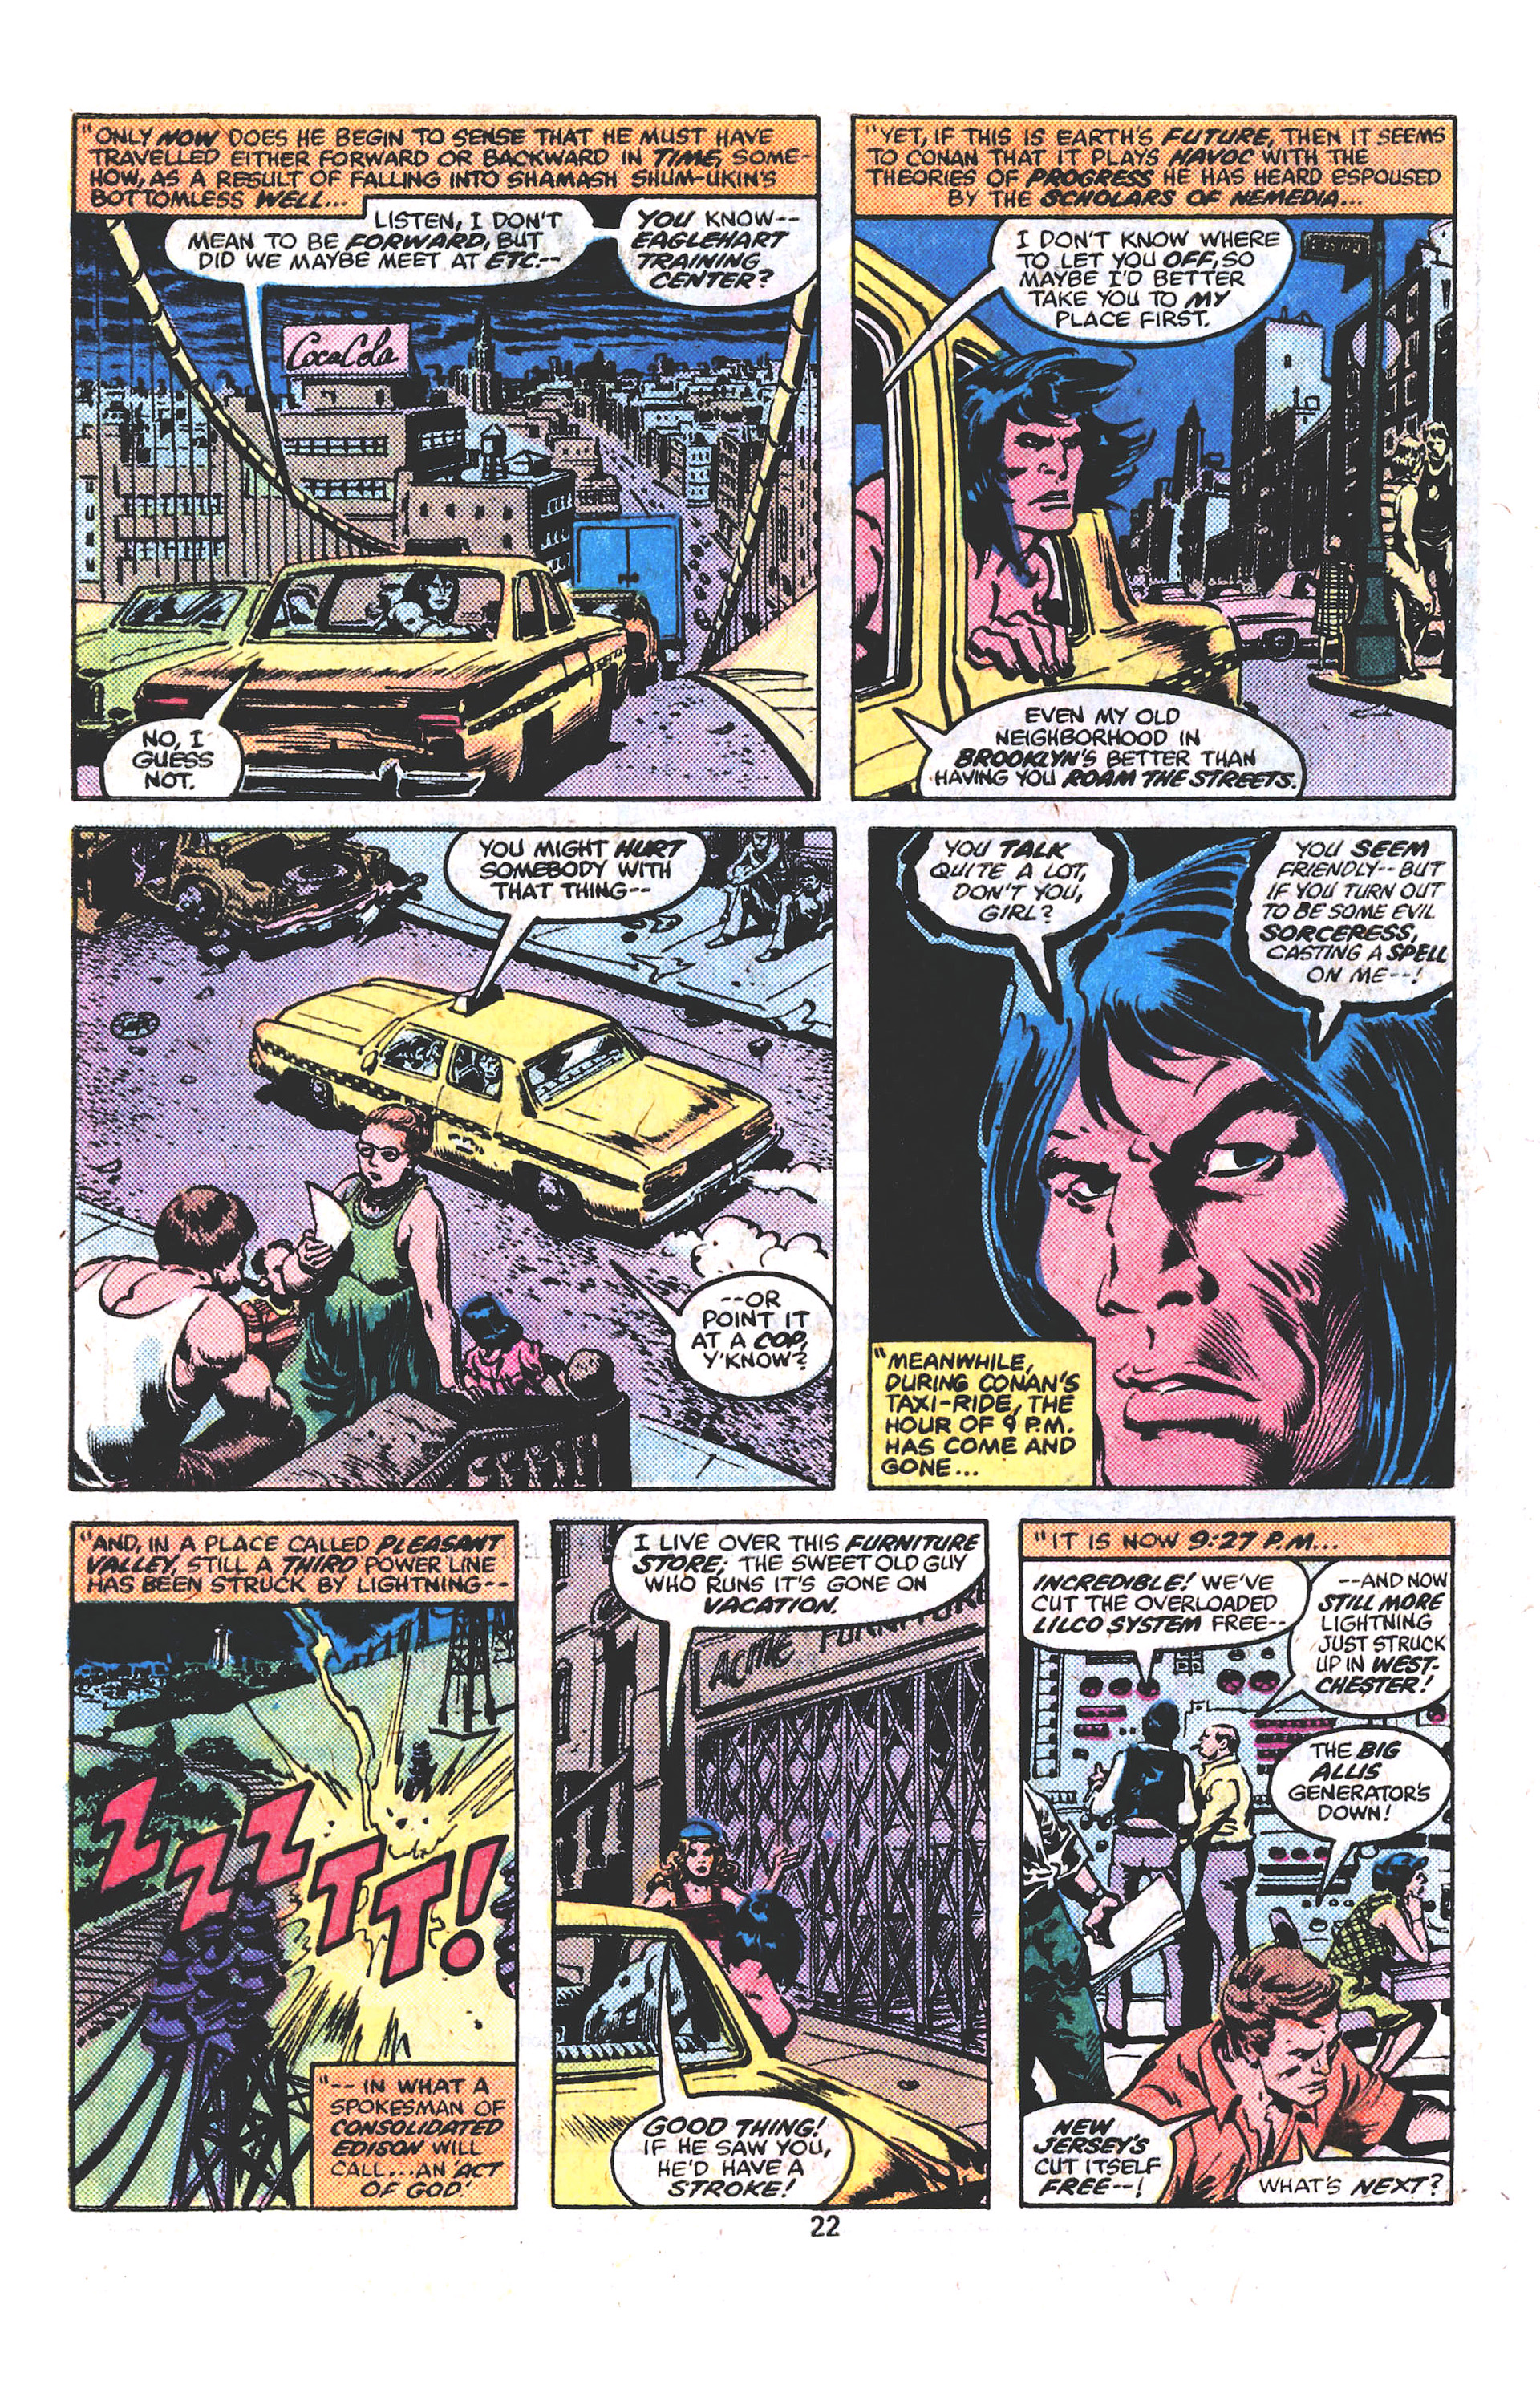 What If? (1977) Issue #13 - Conan The Barbarian walked the Earth Today #13 - English 17